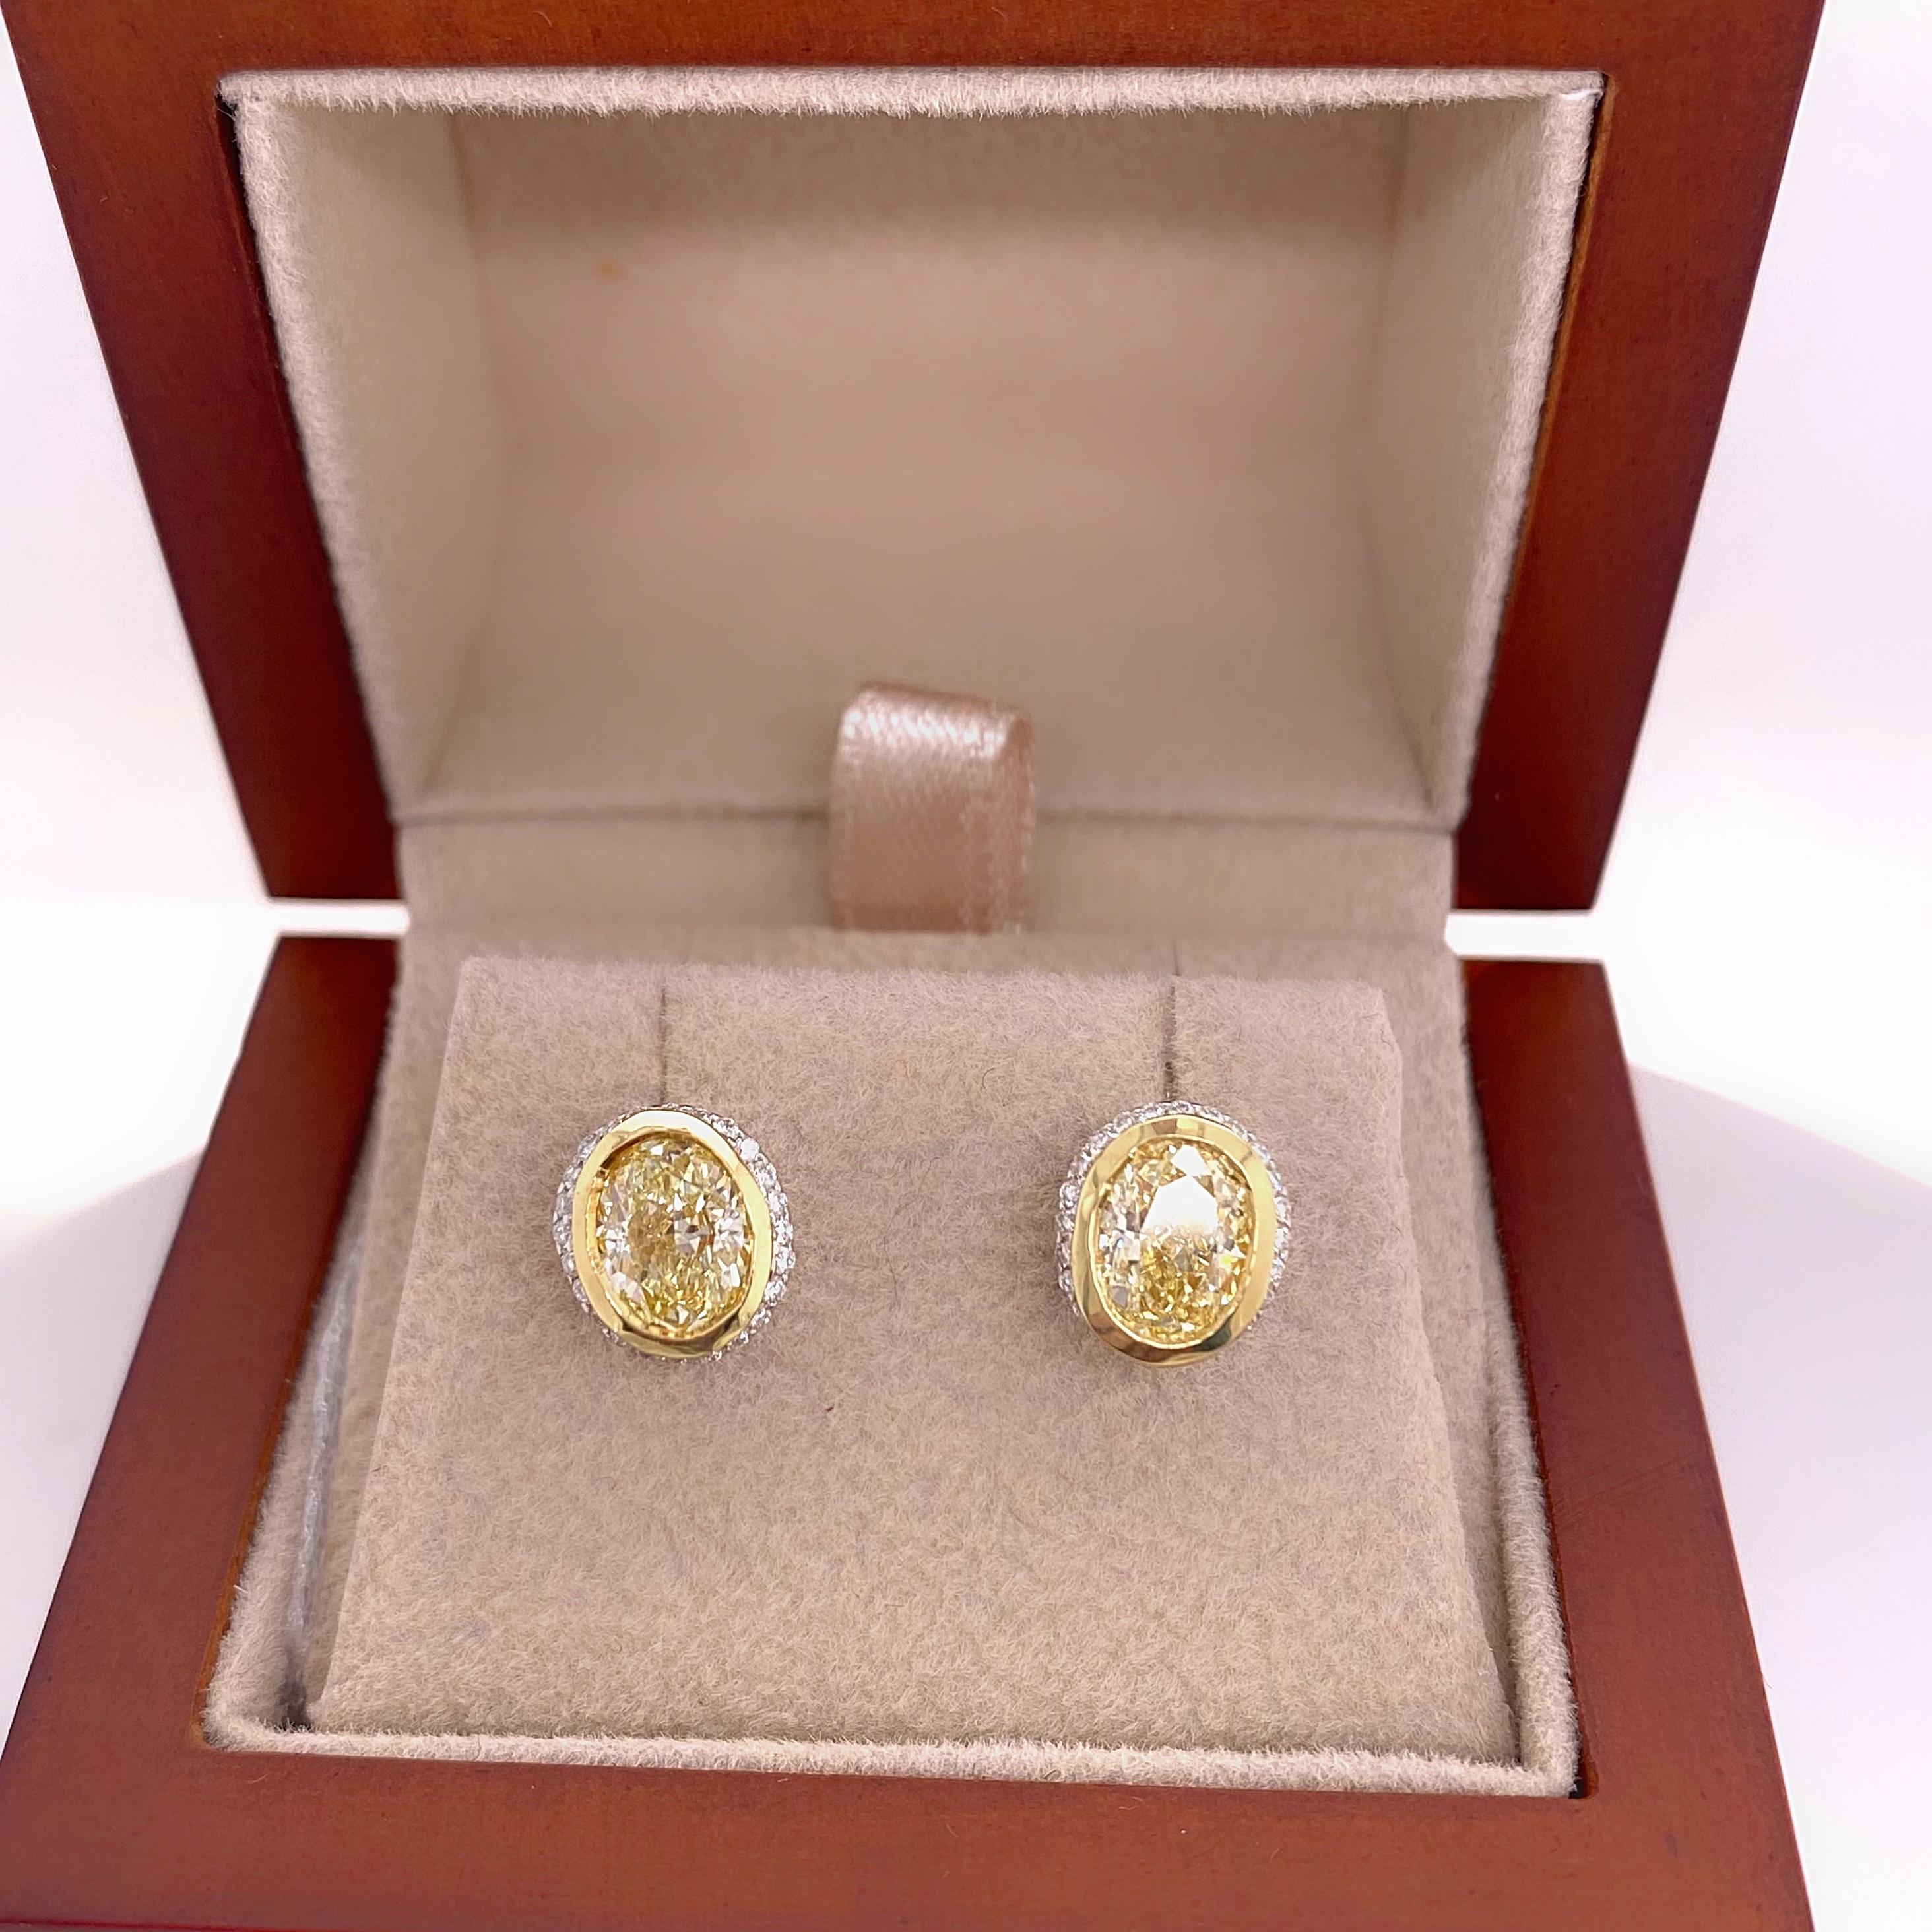 Fancy Yellow Oval Diamond 2.25 tcw Earrings Bezel Set in 18kt Yellow Gold Plat In Excellent Condition For Sale In San Diego, CA